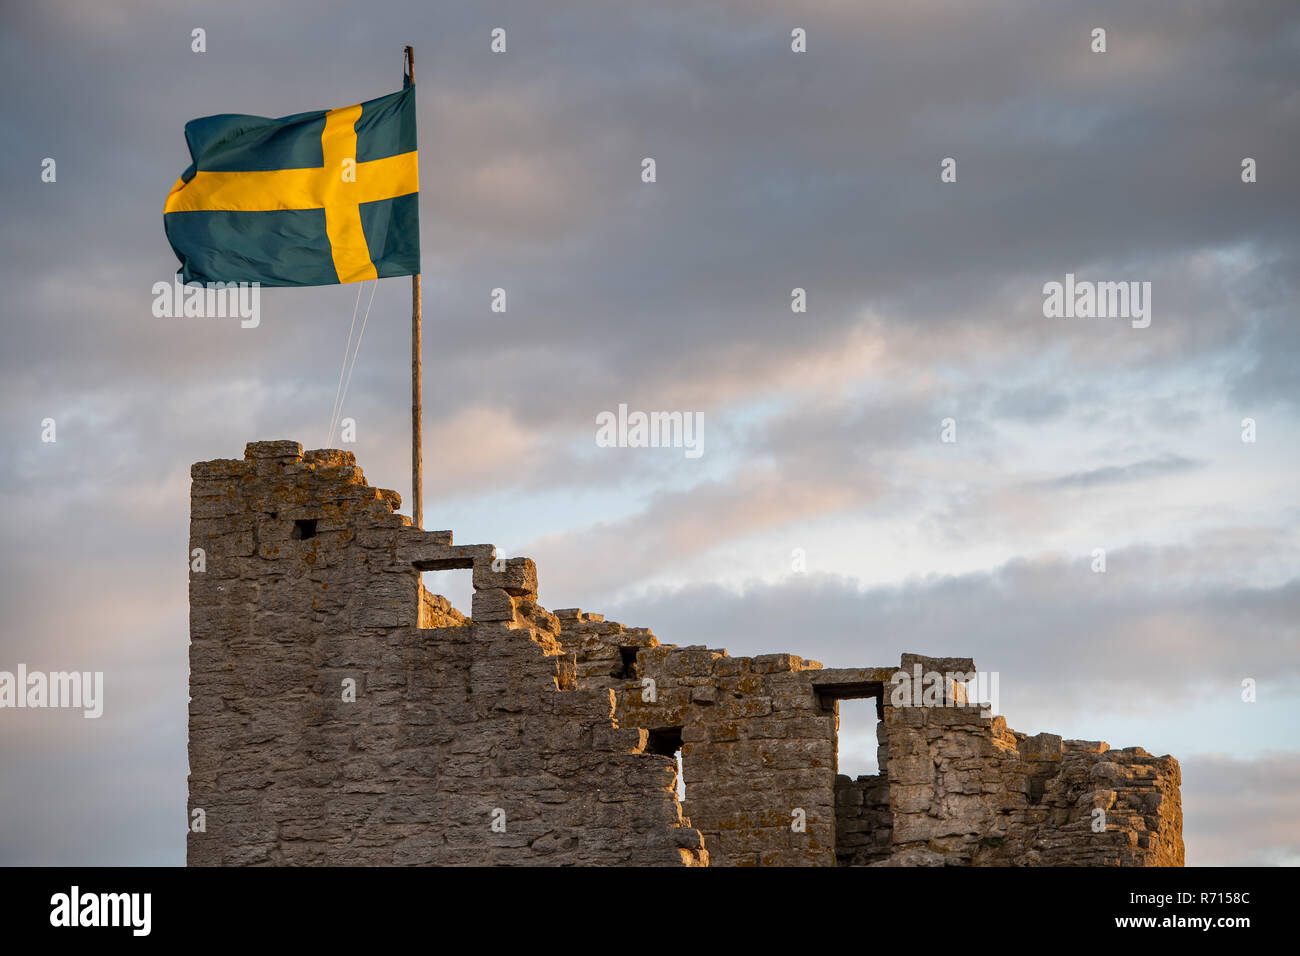 Swedish flag on medieval city wall, Unesco World Heritage Site, Visby, Gotland Island, Sweden Stock Photo